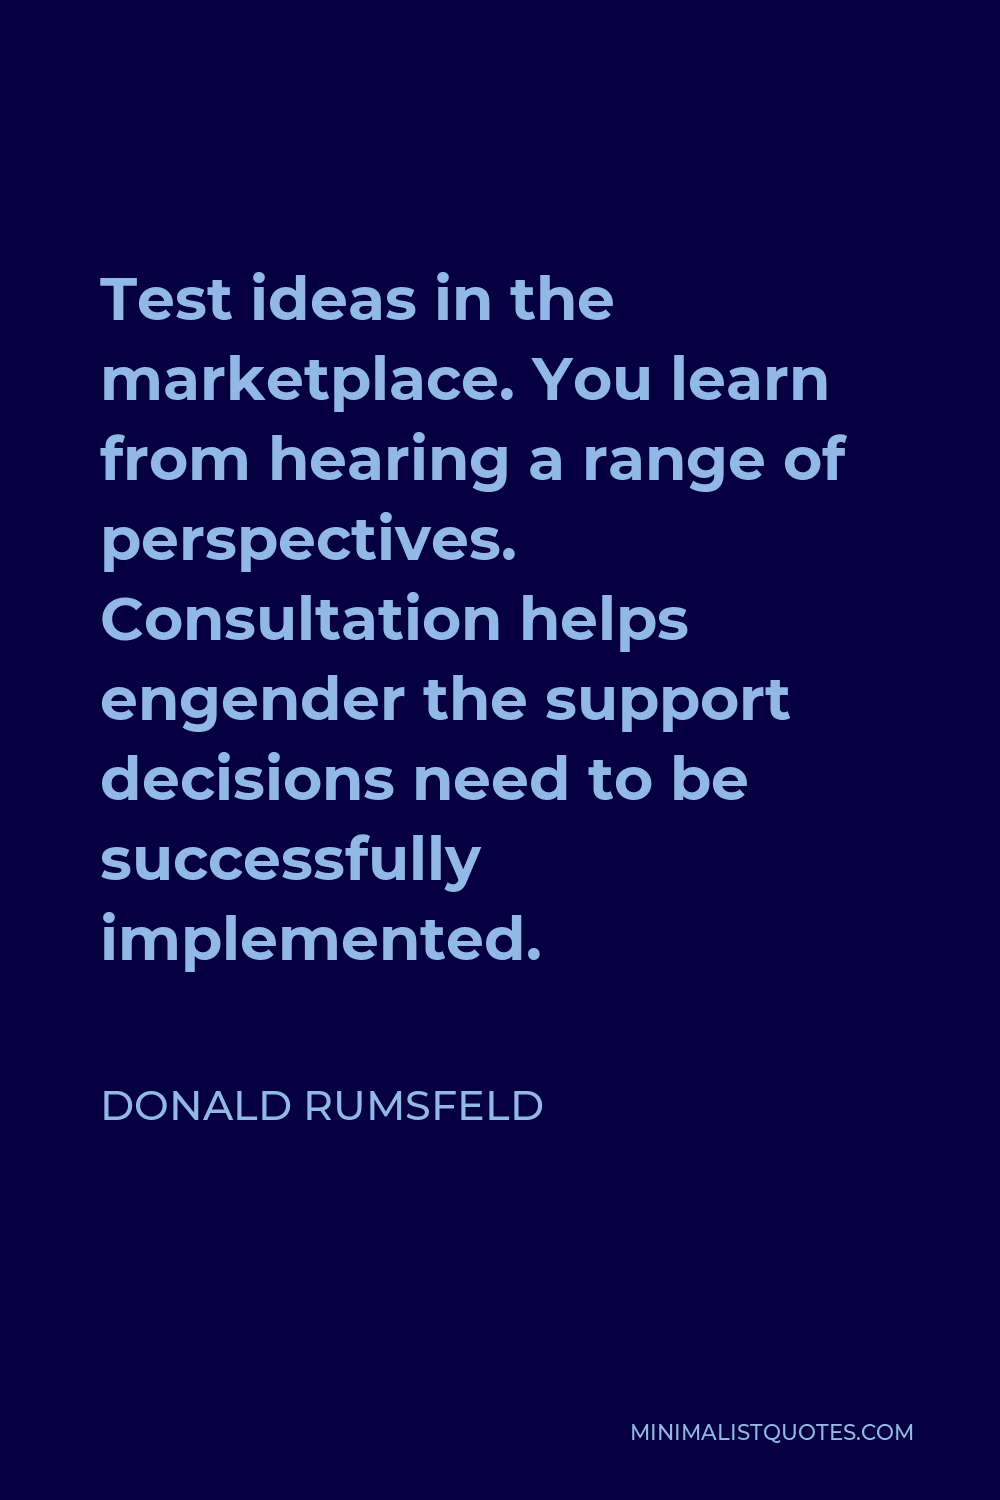 Donald Rumsfeld Quote - Test ideas in the marketplace. You learn from hearing a range of perspectives. Consultation helps engender the support decisions need to be successfully implemented.